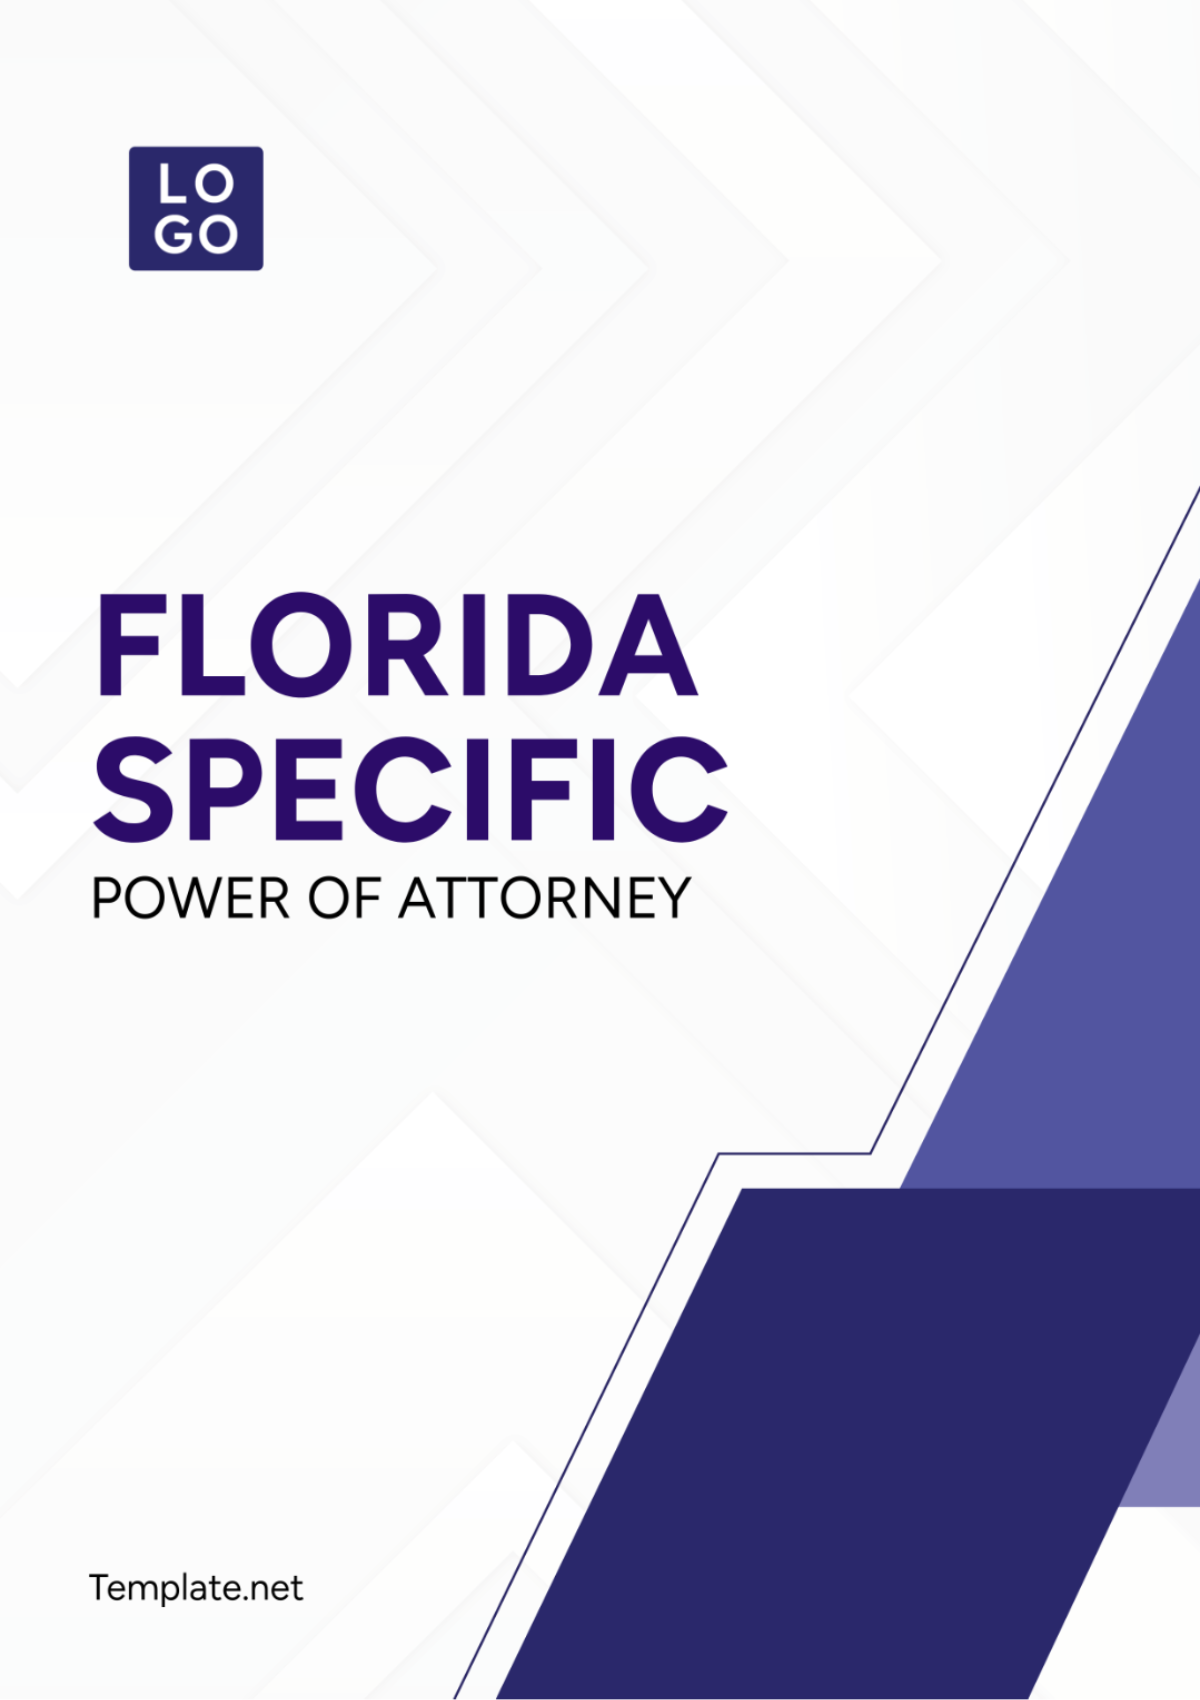 Florida Specific Power of Attorney Template